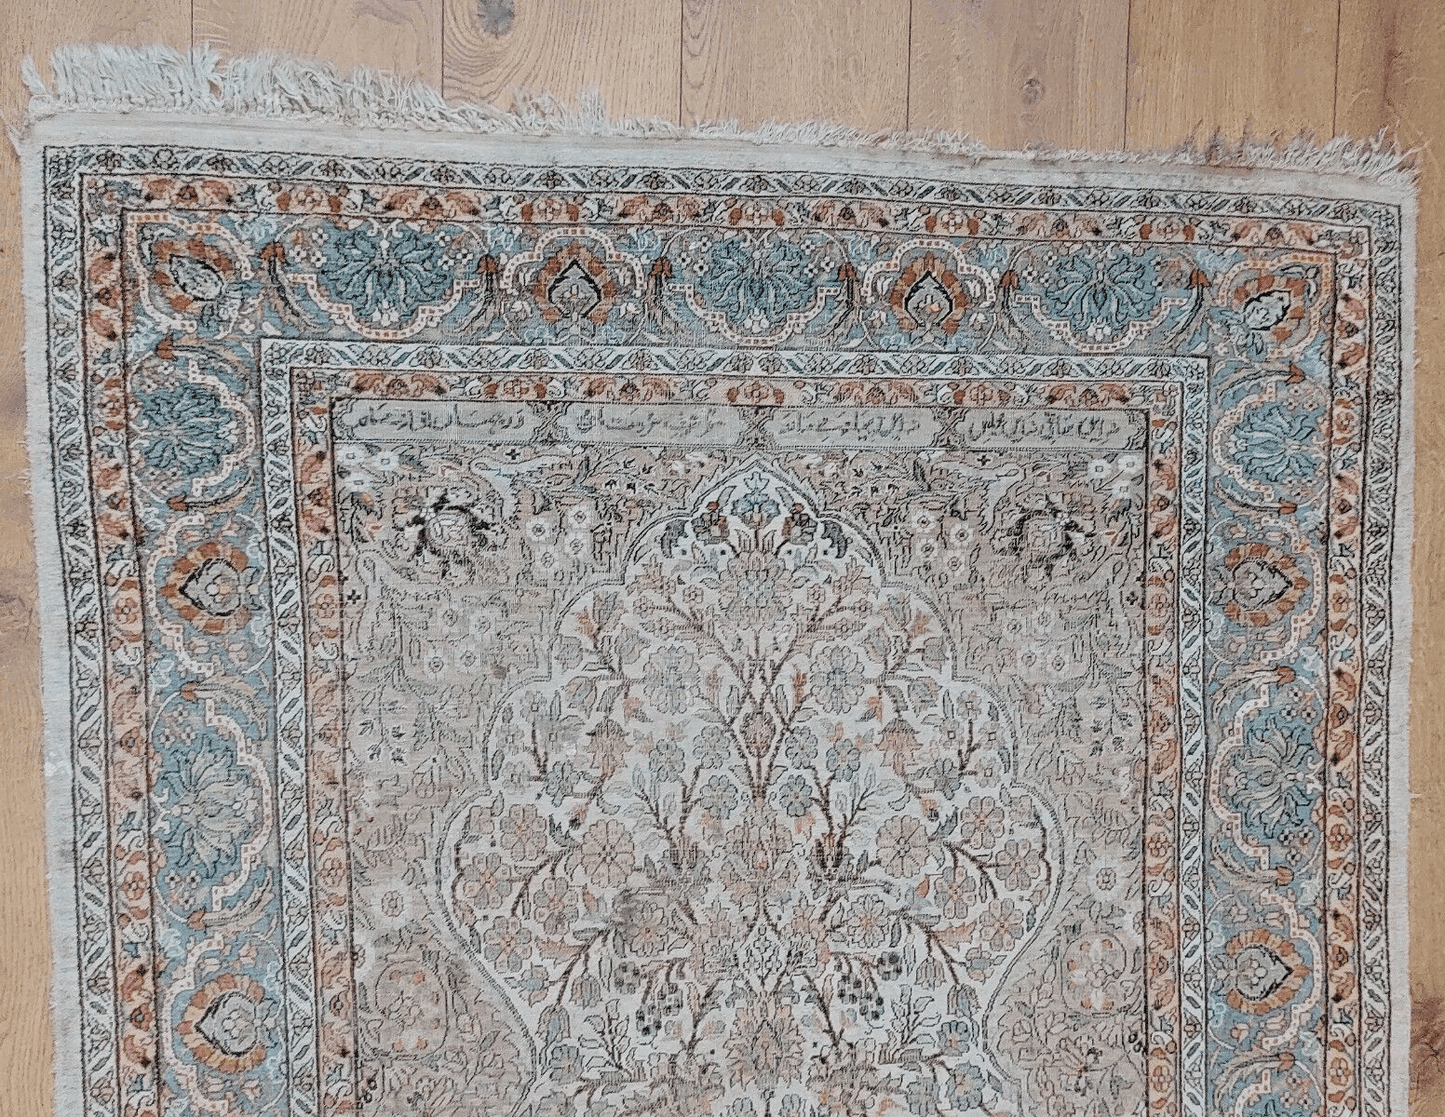 Antique Traditional Handmade Persian Tree of Life Wool Rug Carpet - 190 X 119 cm - Tommy's Treasure